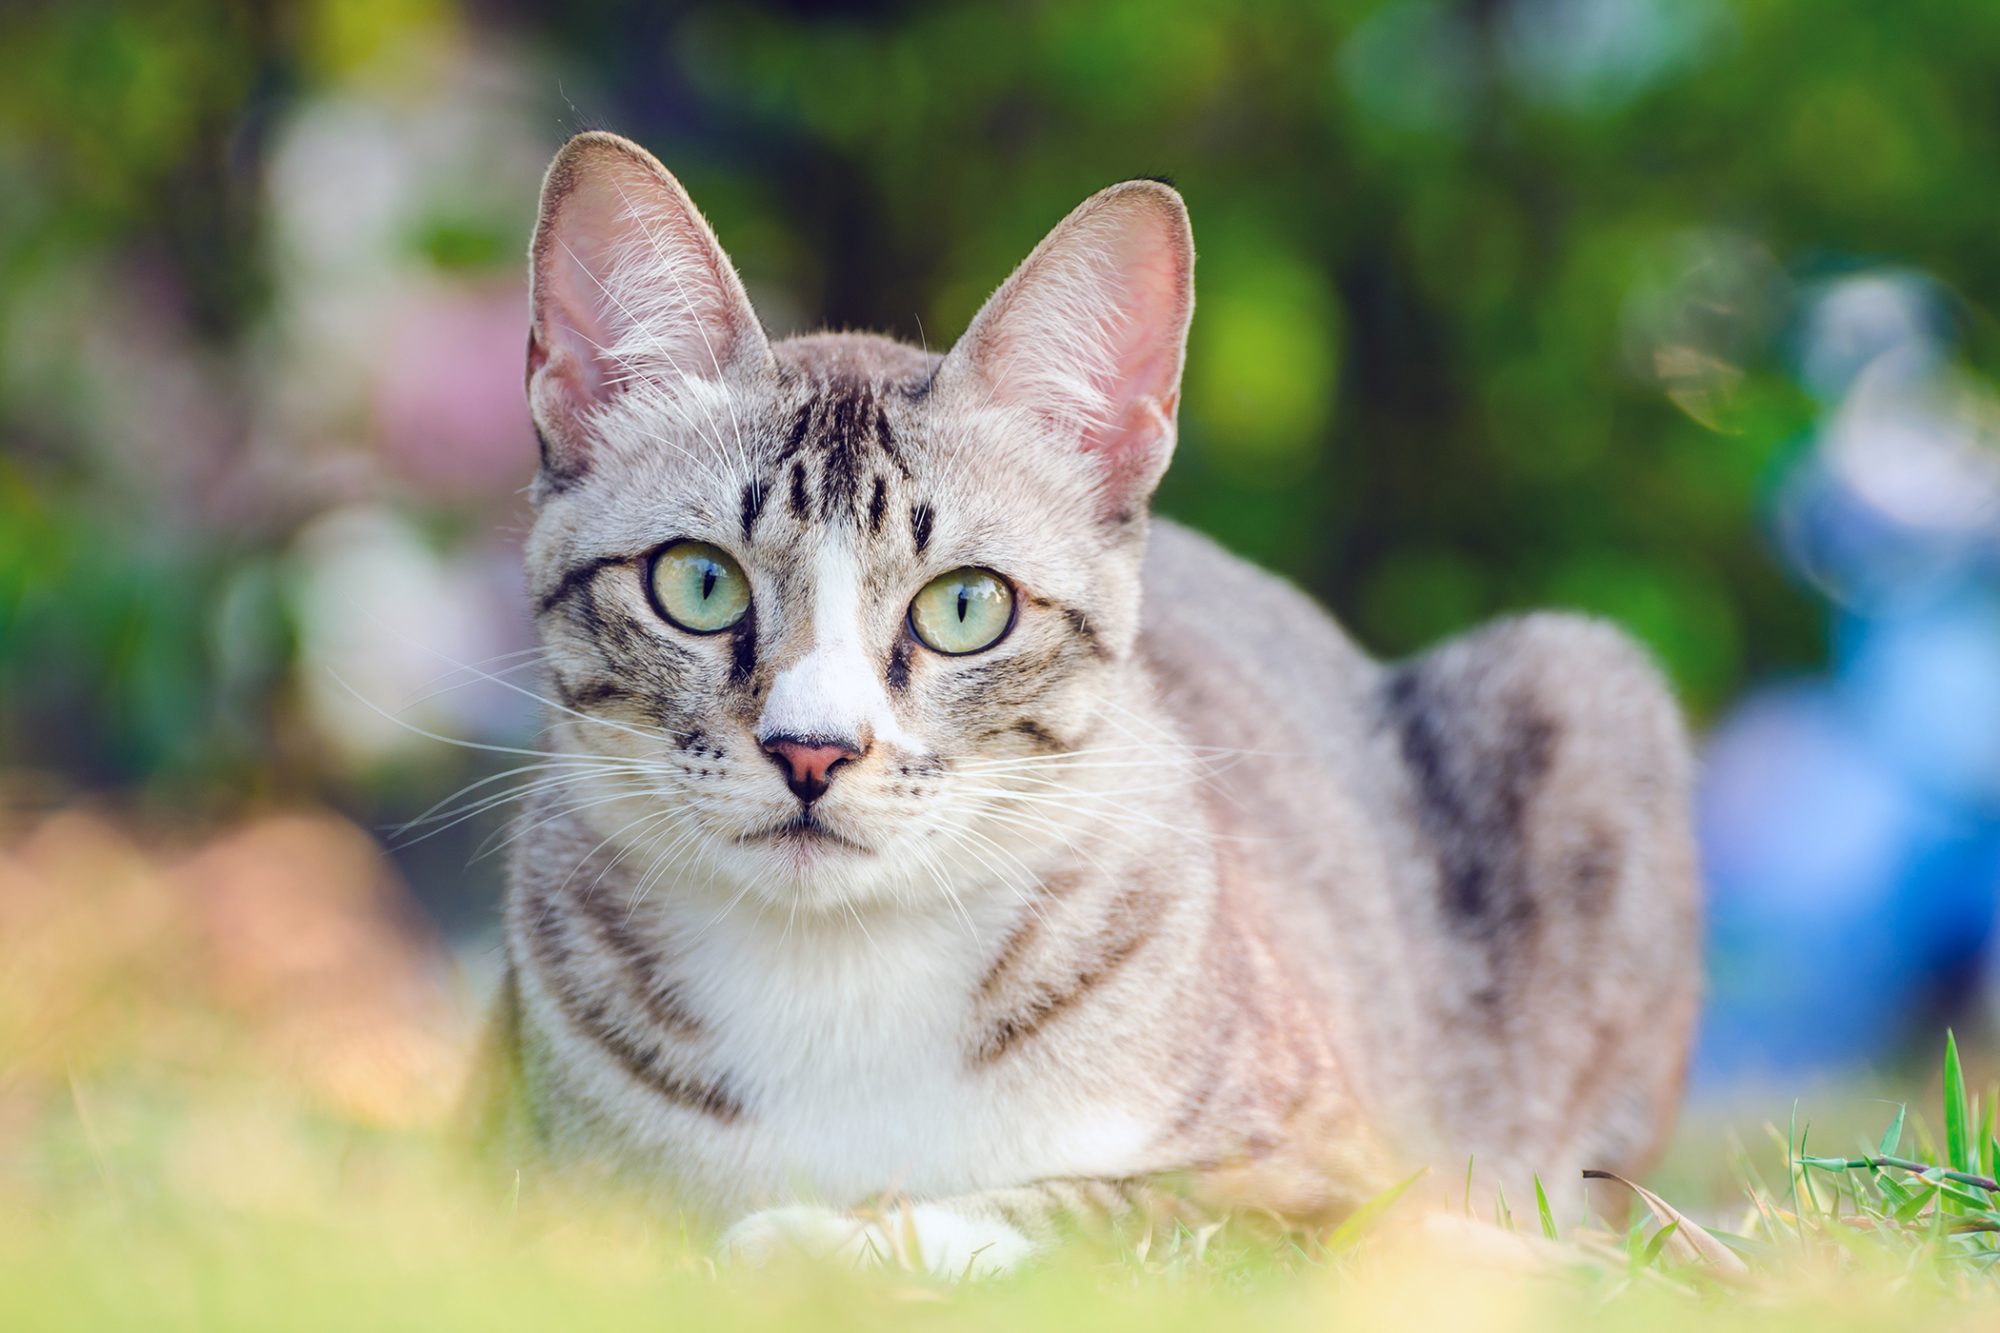 How long does it take a cat to recover from toxoplasmosis?